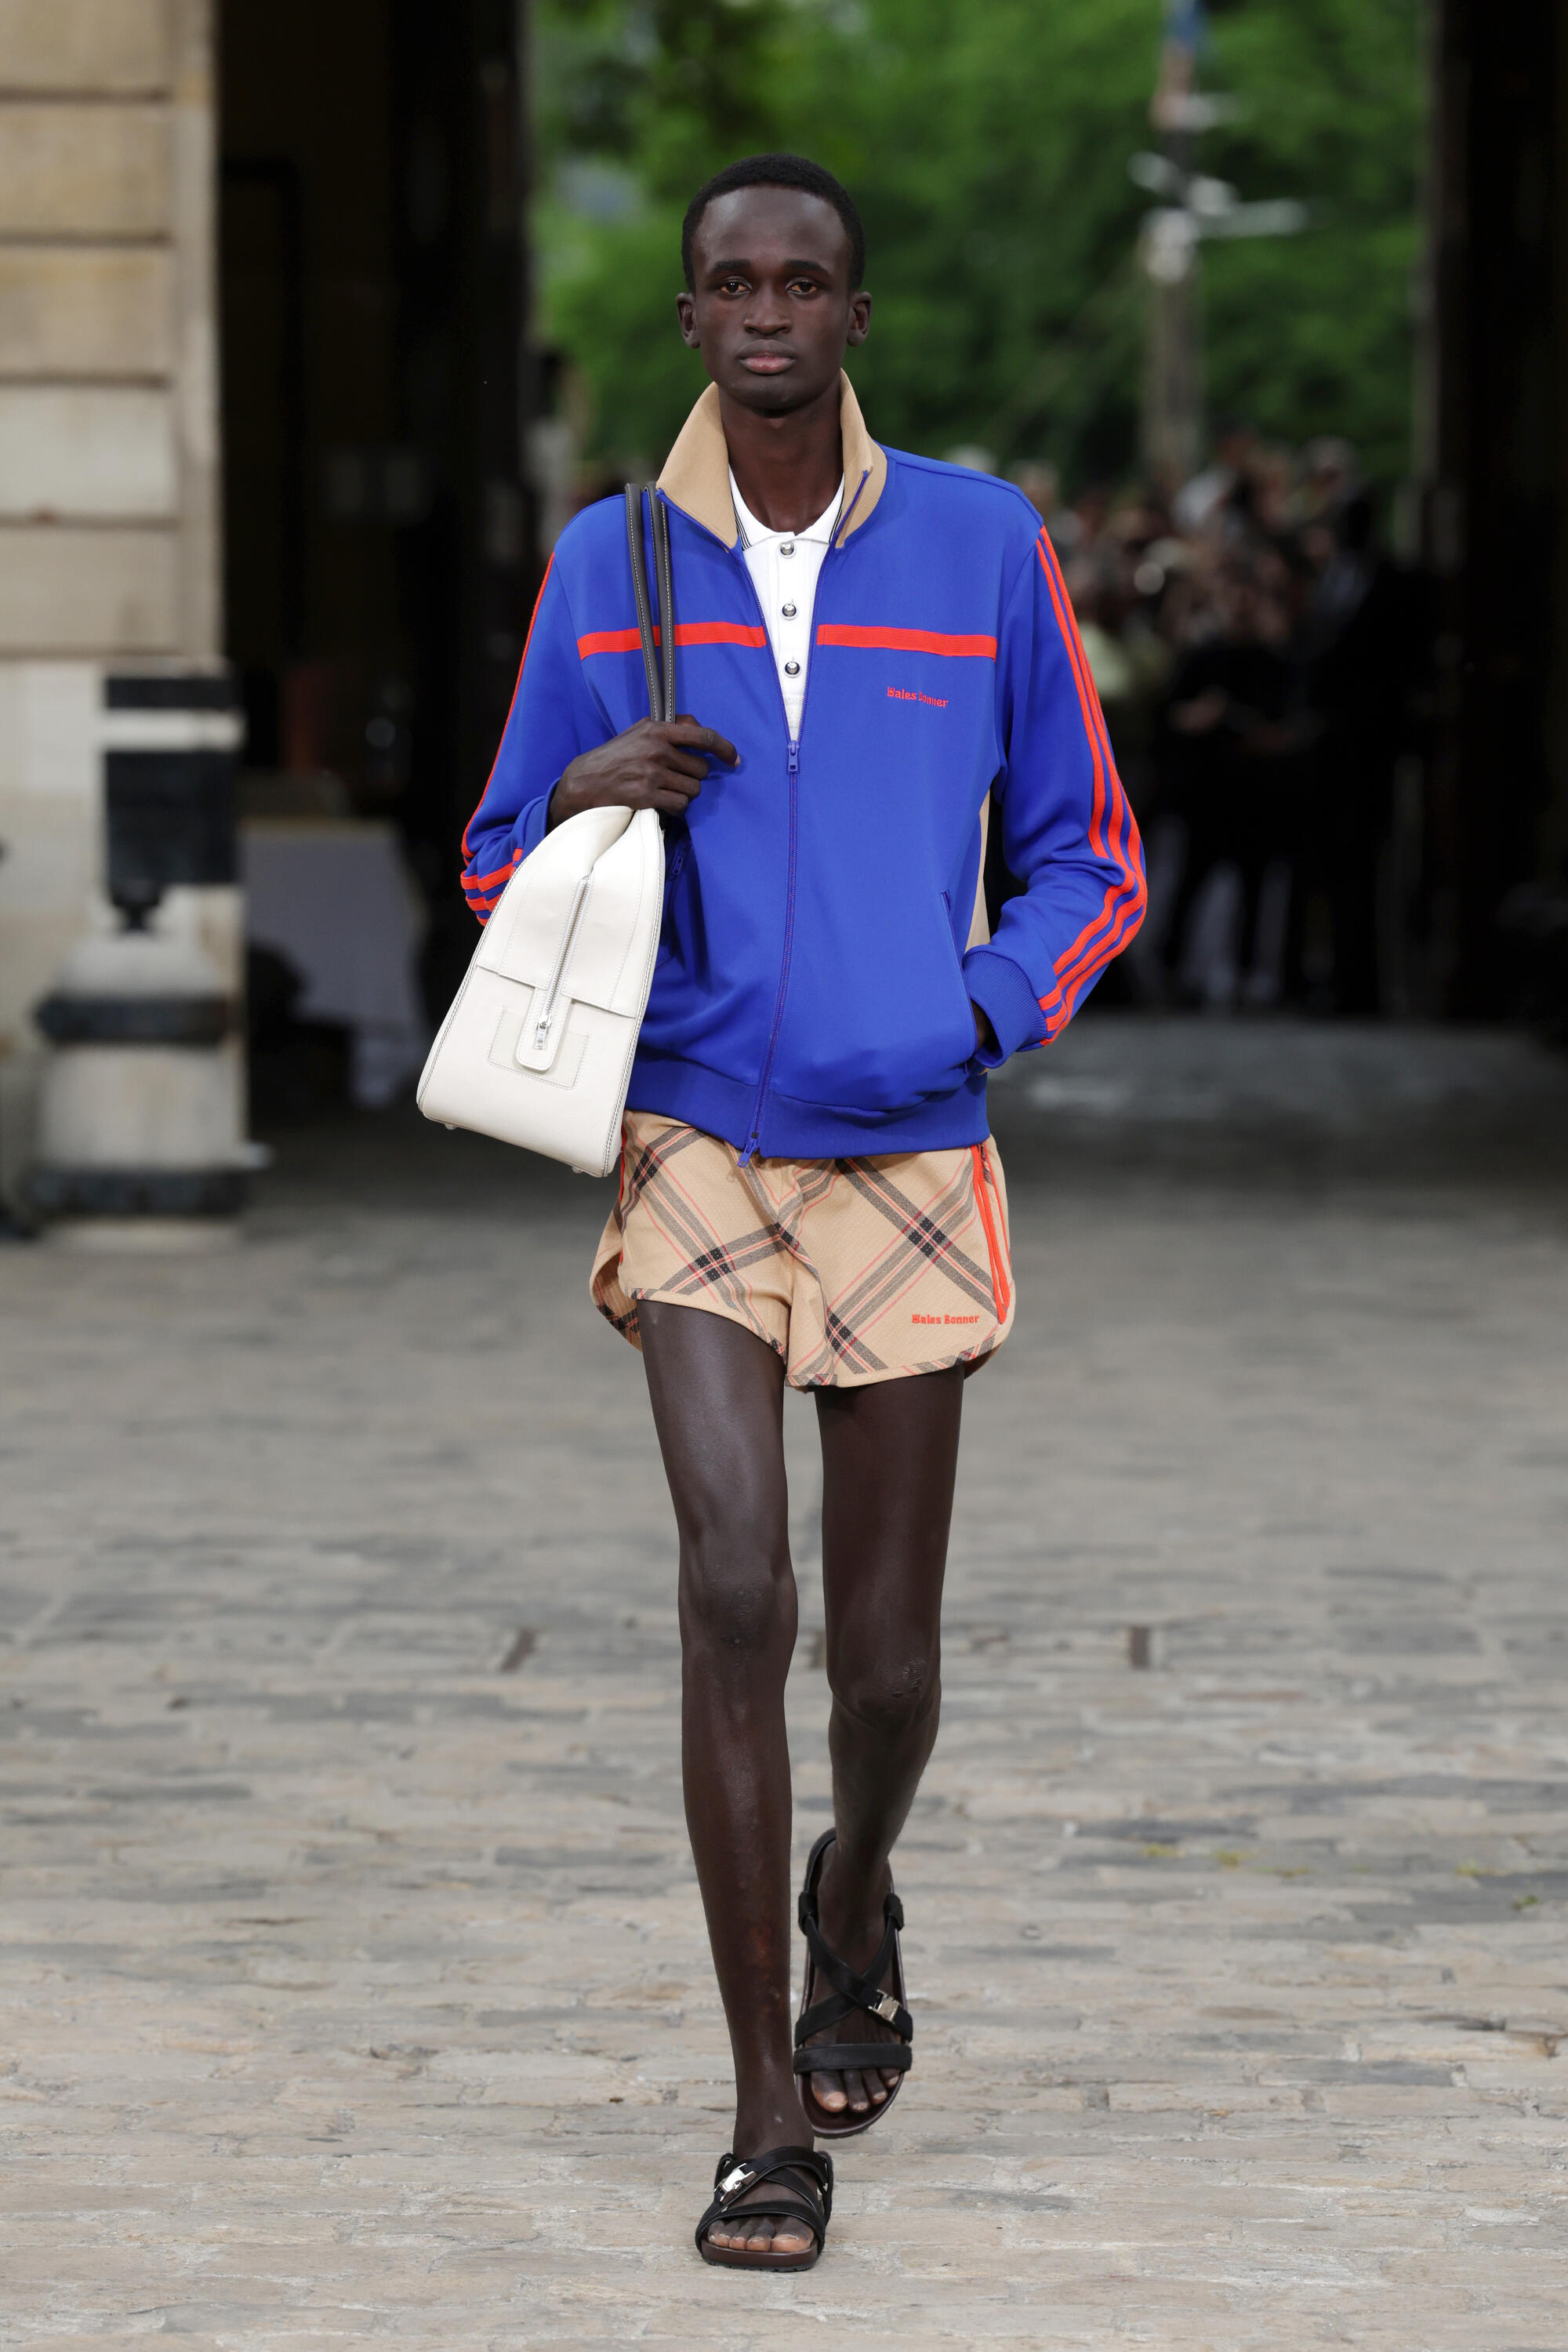 Paris Fashion Week: Top moments from the menswear shows – KION546